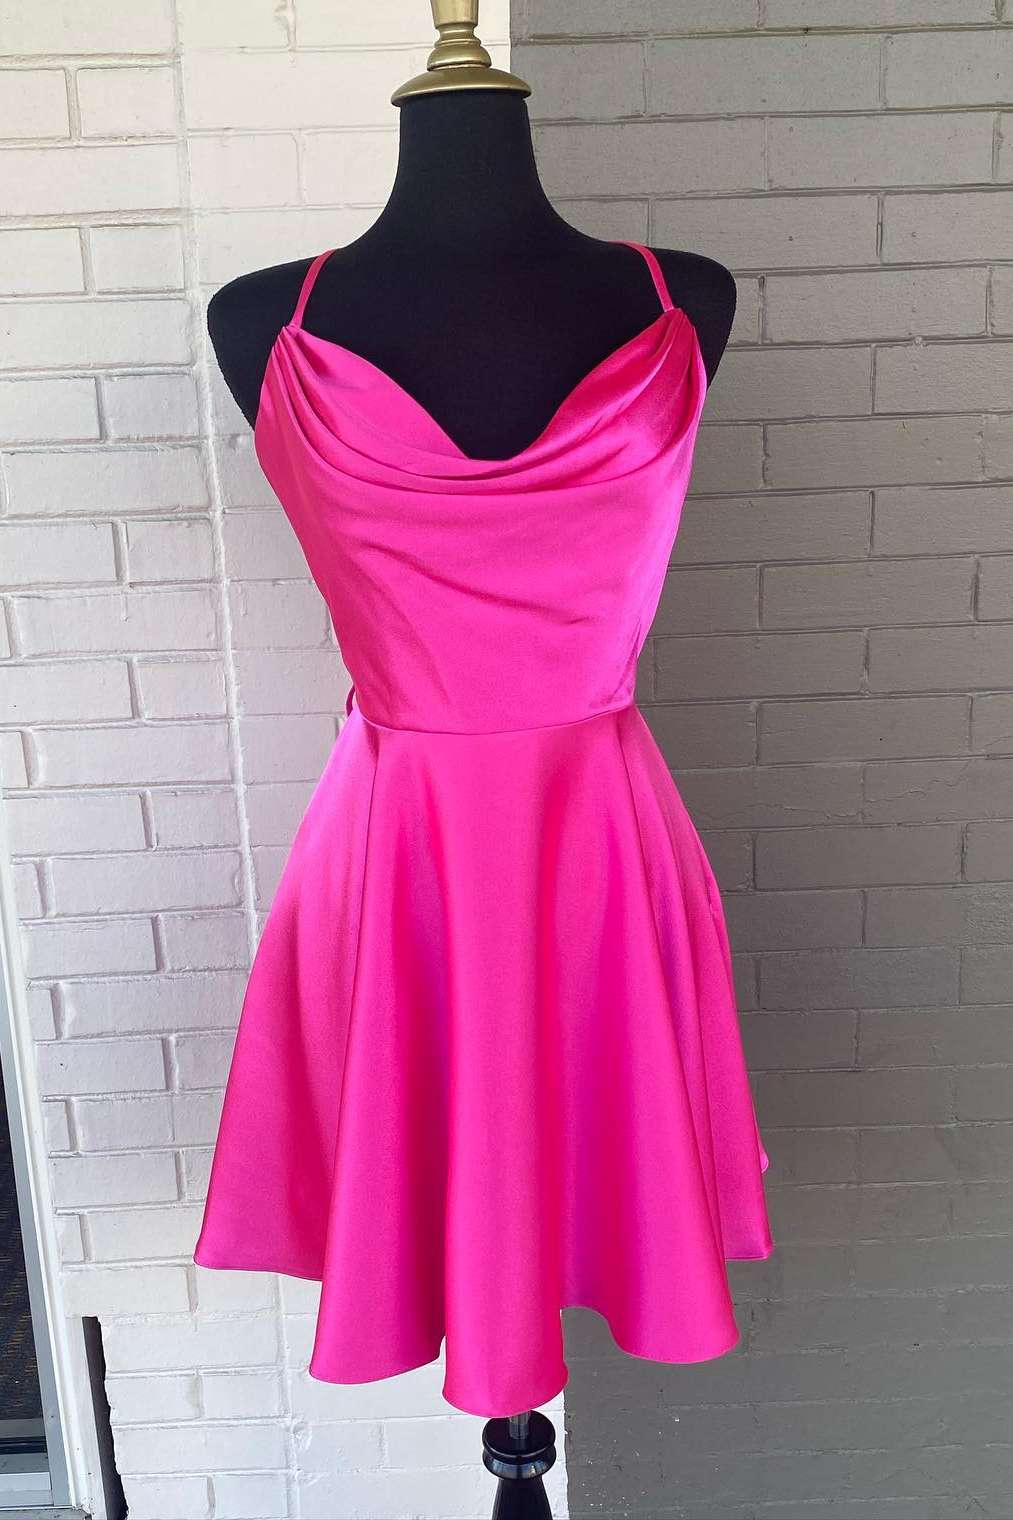 Neon Pink Cowl Neck A-Line Corset Homecoming Dress outfit, Prom Dresses Green